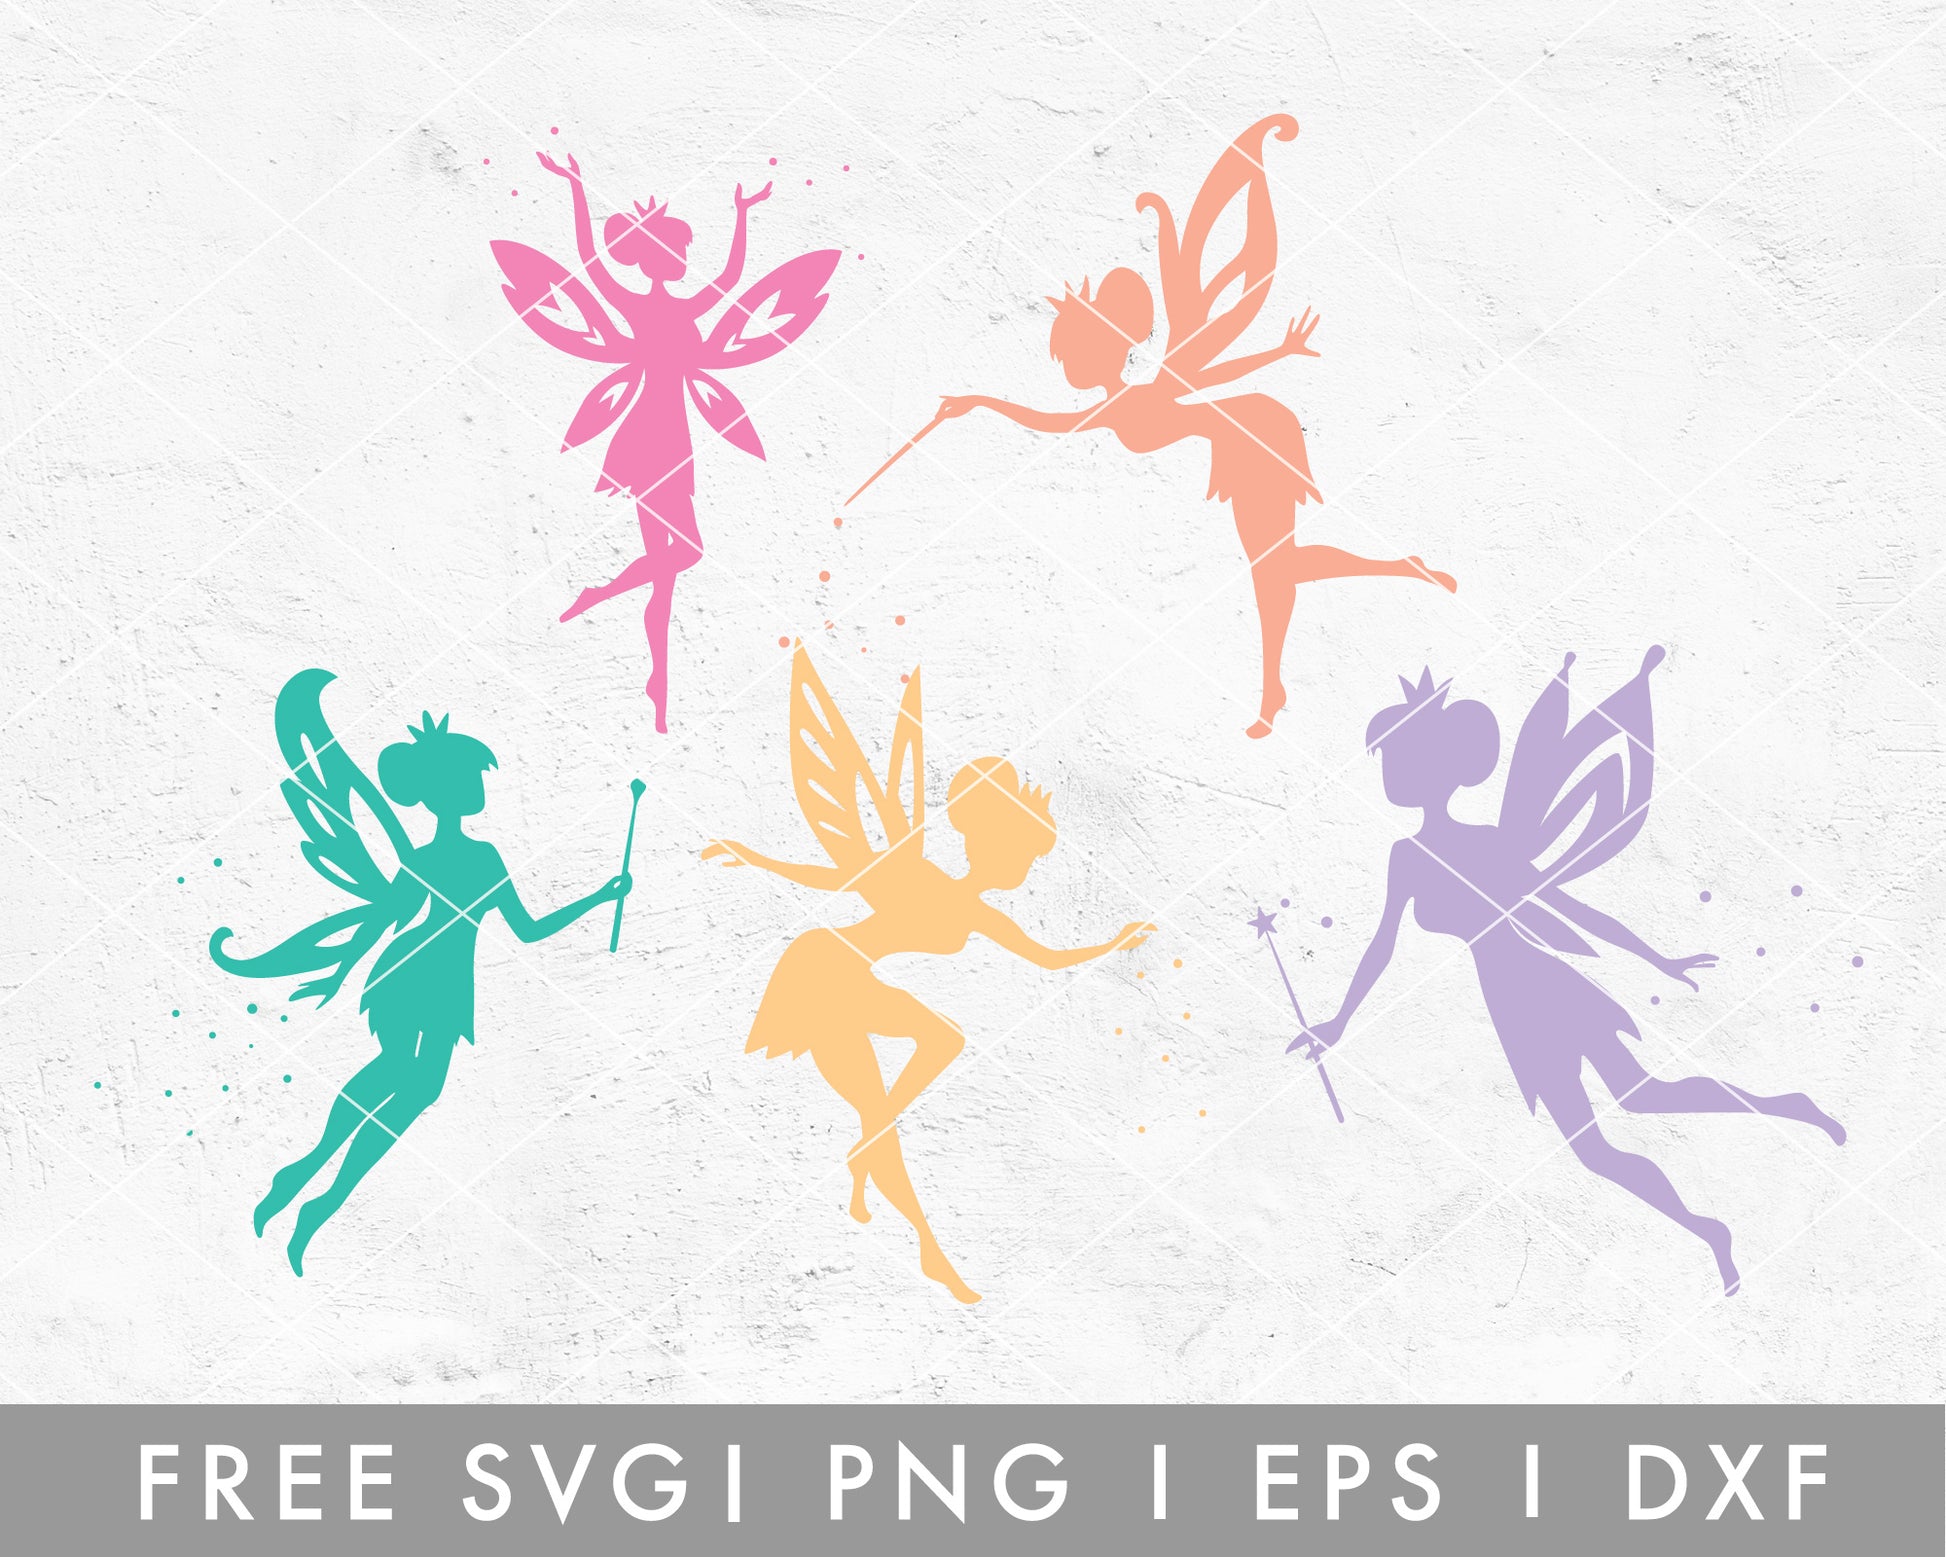 FREE Butterfly SVG | Hand Drawn Cut File for Cricut, Cameo Silhouette | Free SVG Cut File